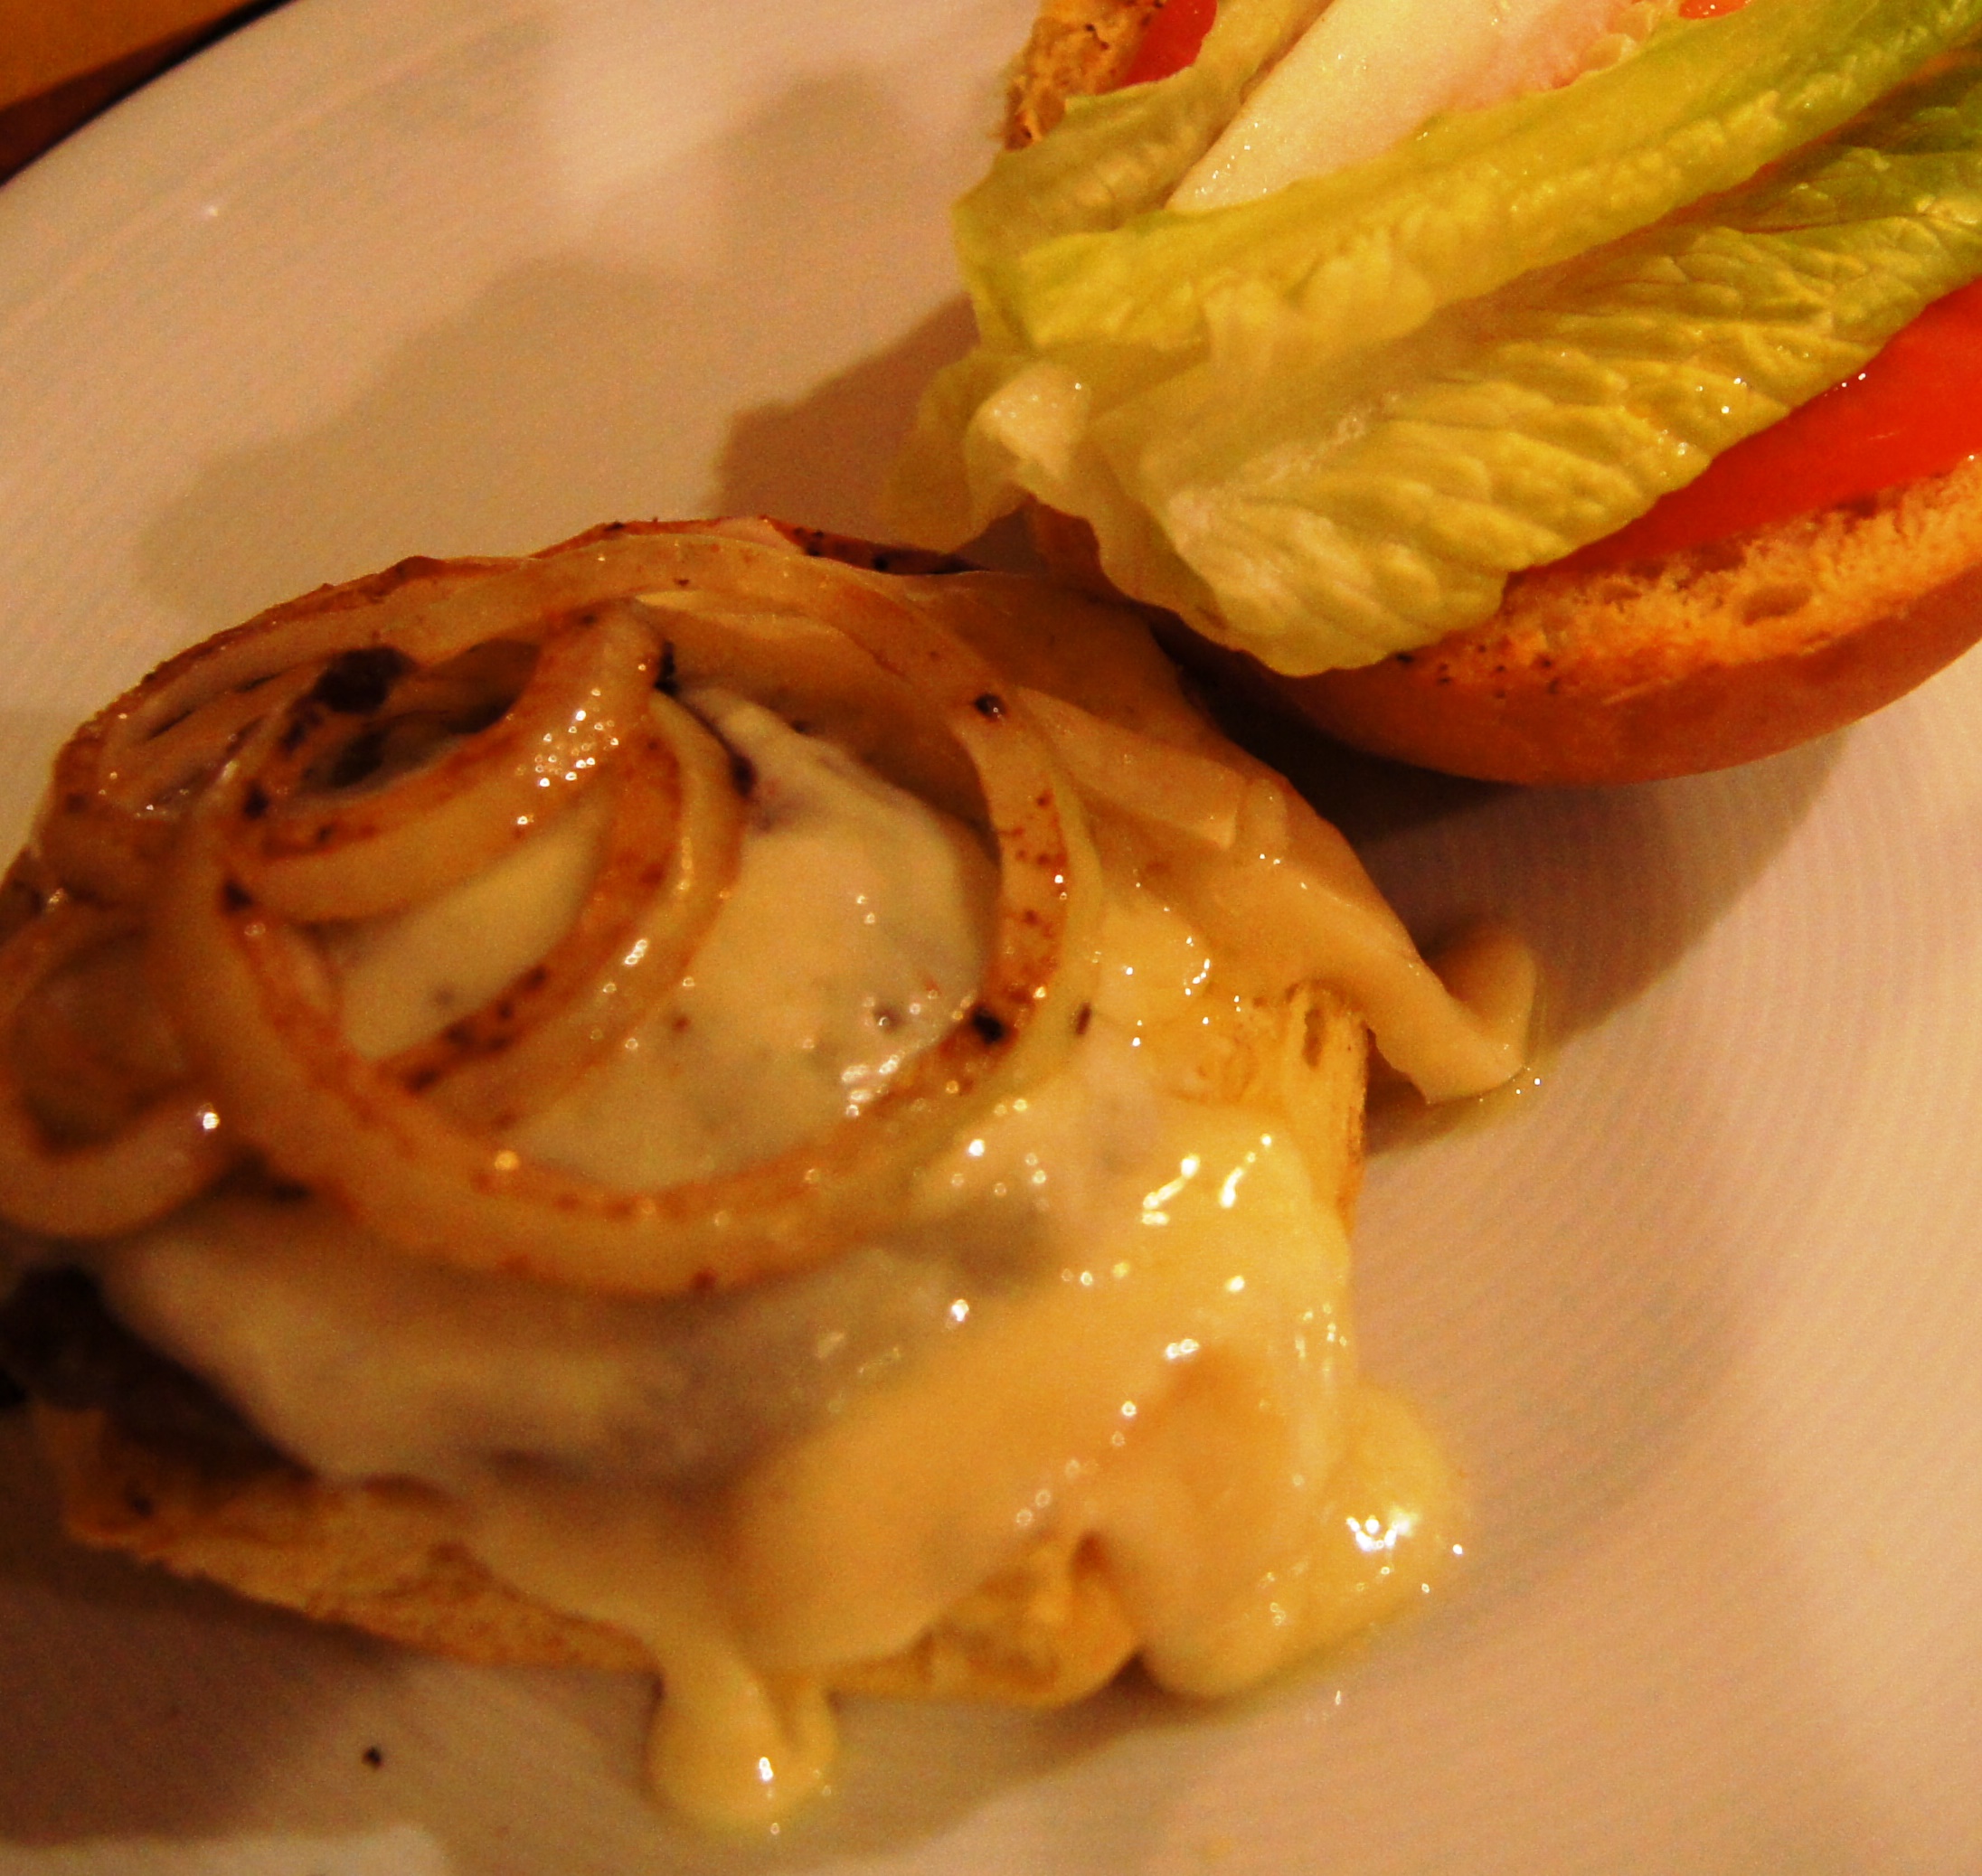 https://toolstocook.files.wordpress.com/2014/01/burger-with-onion-and-cheese.jpg